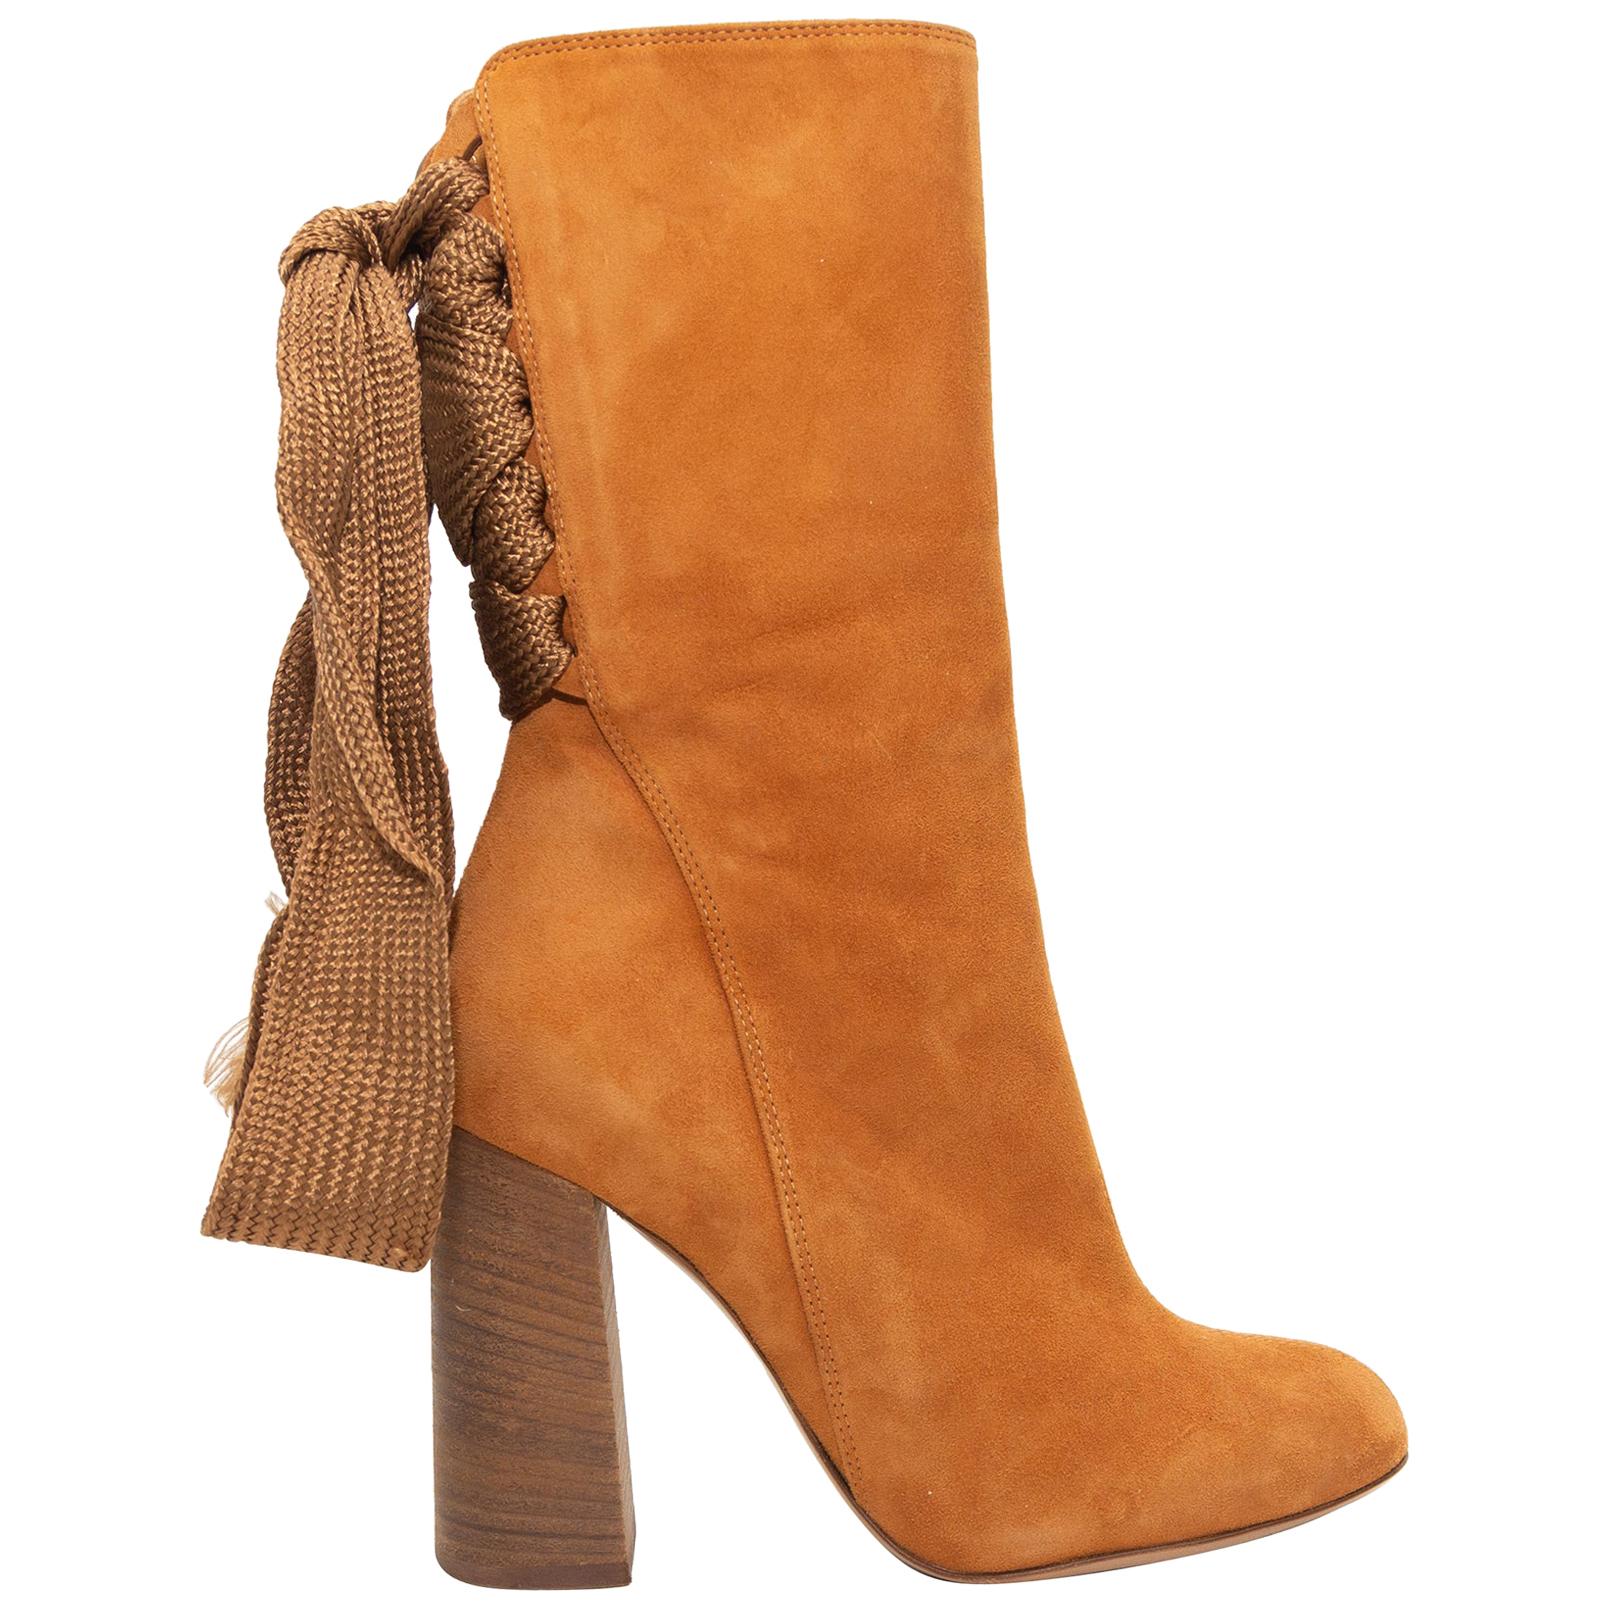 Chloe Tan Suede Harper Ankle Boots